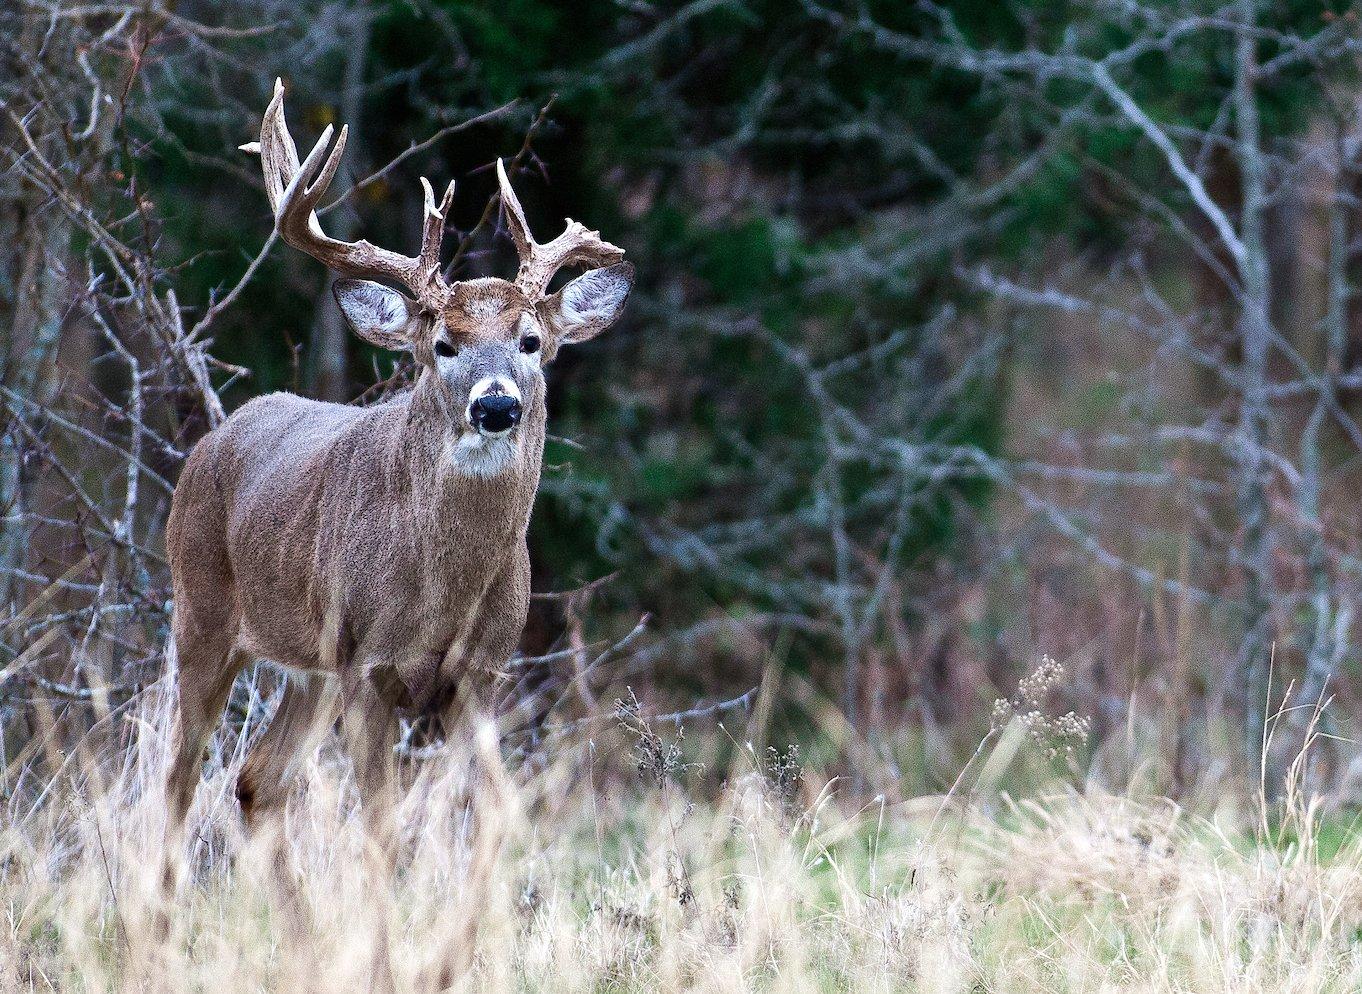 What’s Up with All These Busted and Broken Deer Antlers? - Realtree Camo